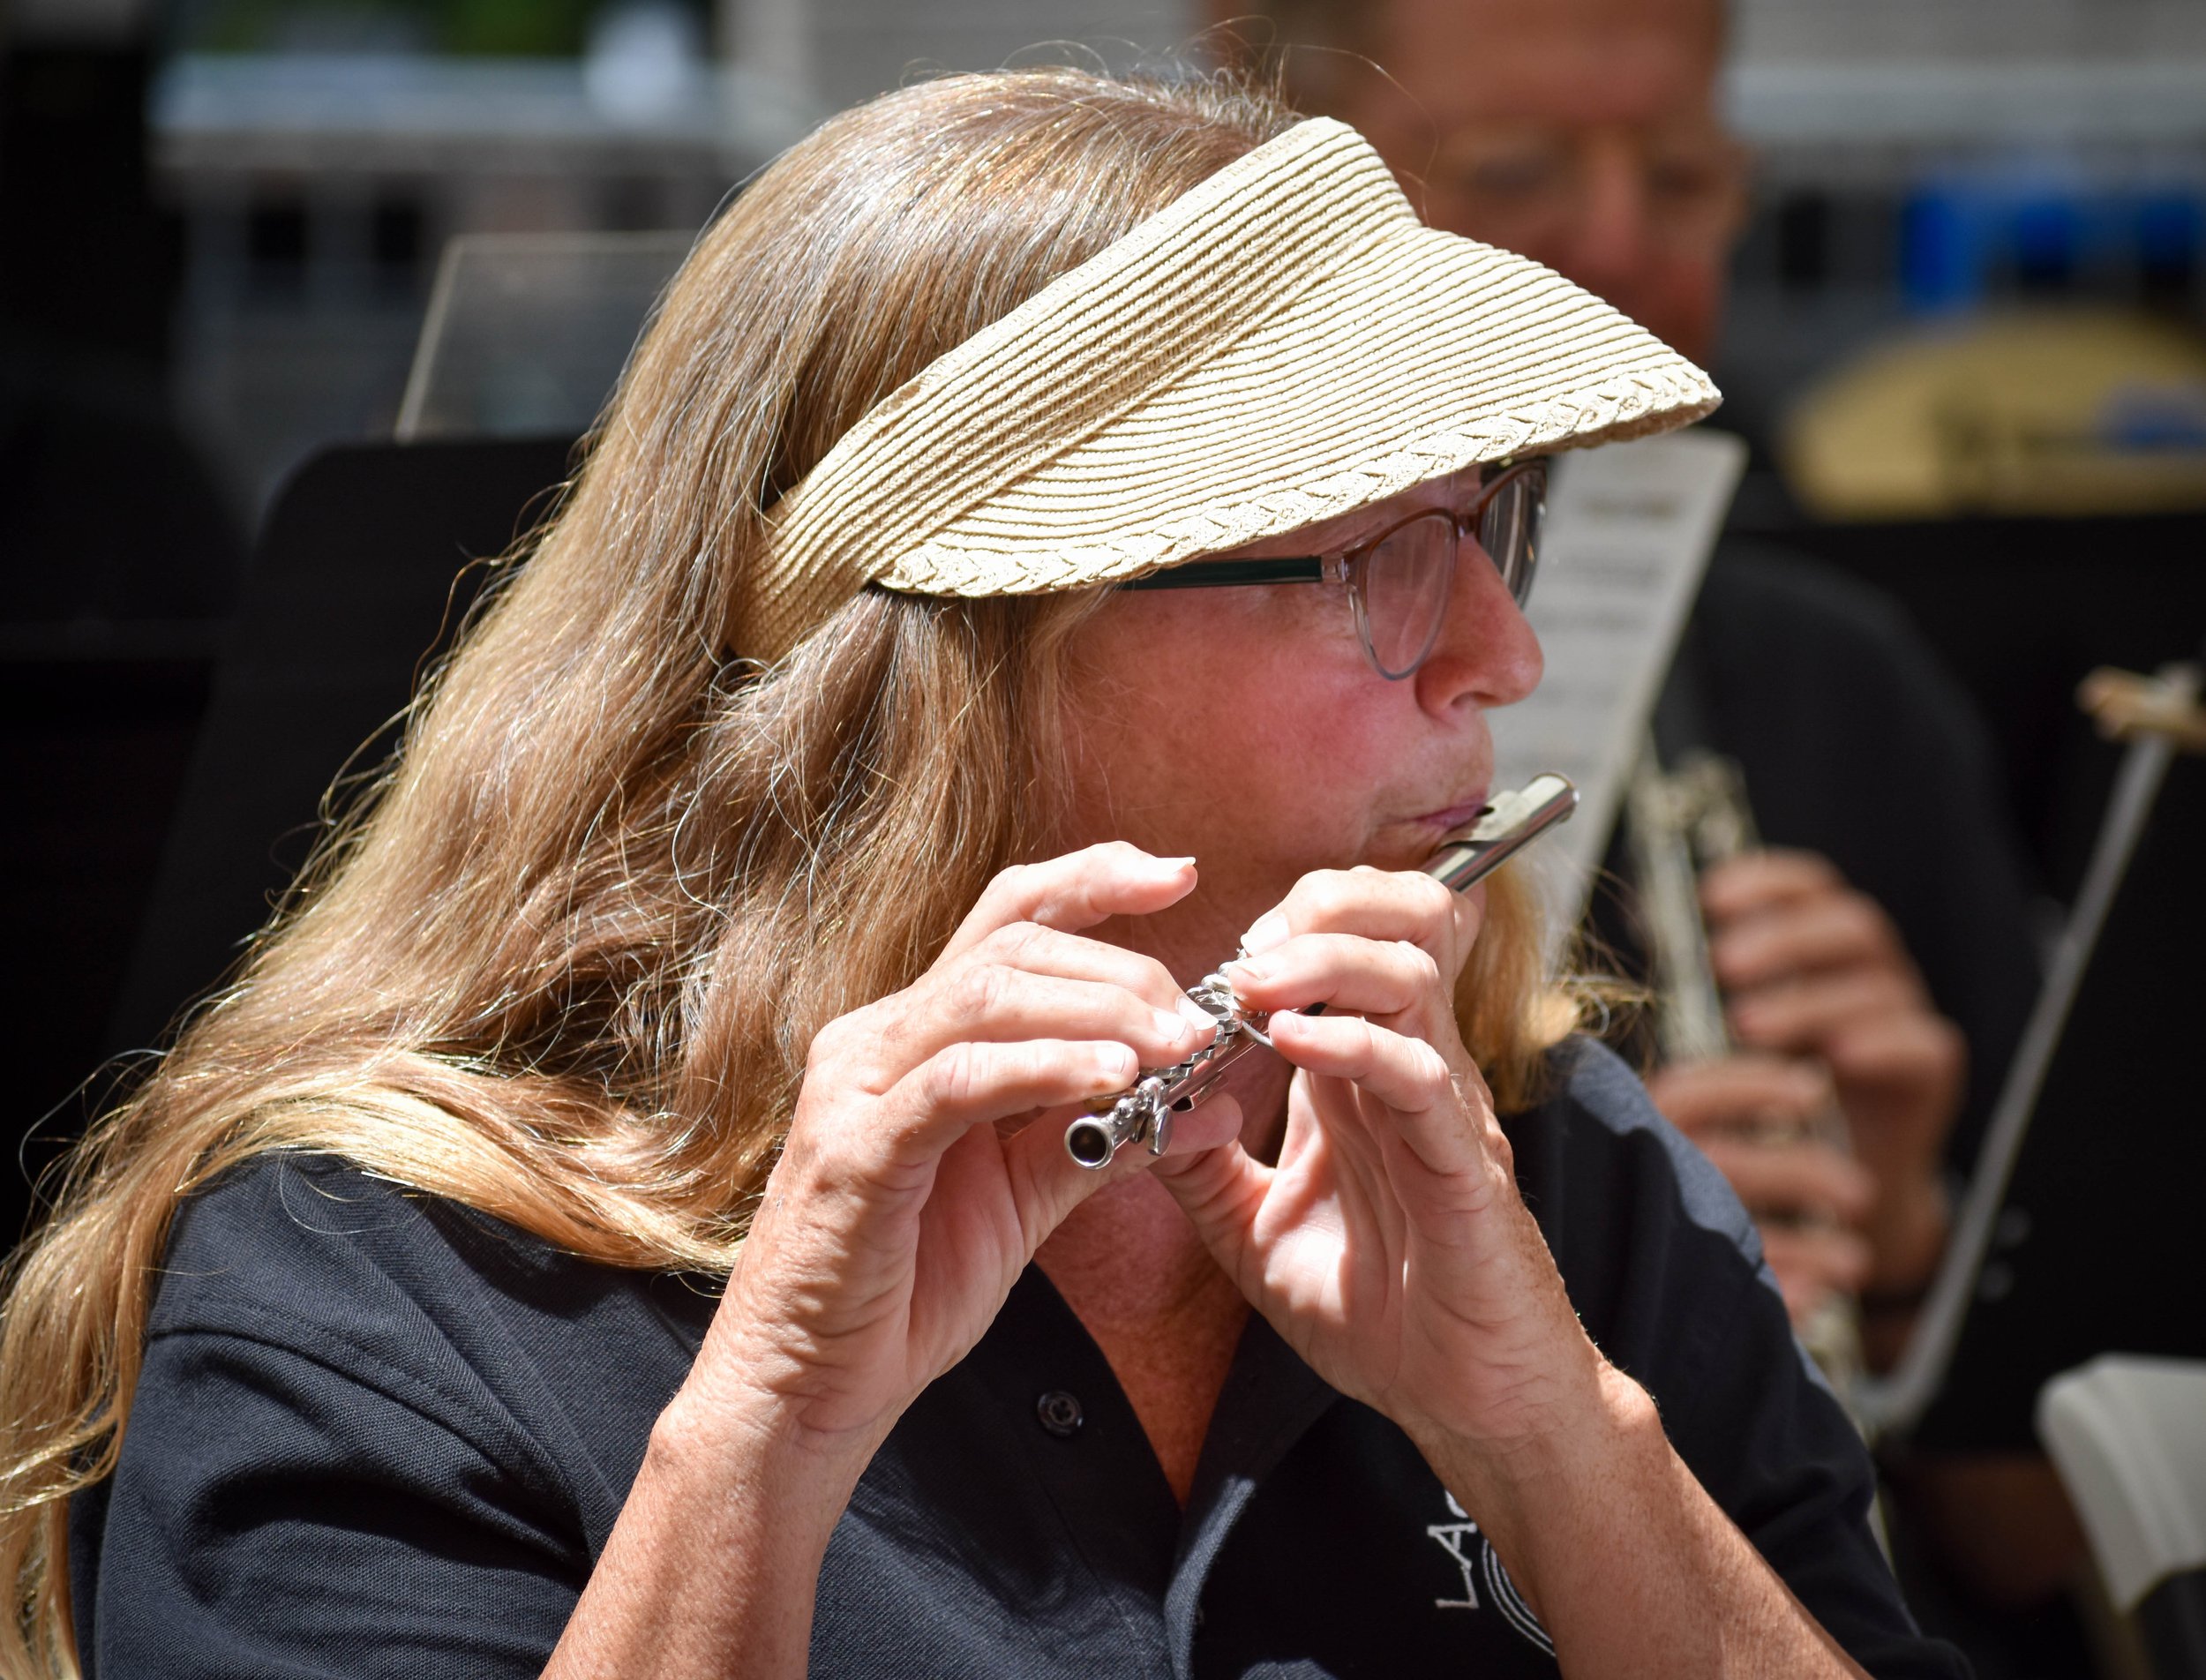 07-17-2022 LCCB Fest of Arts Summer Concert Series by Peyton Webster185-61.jpg